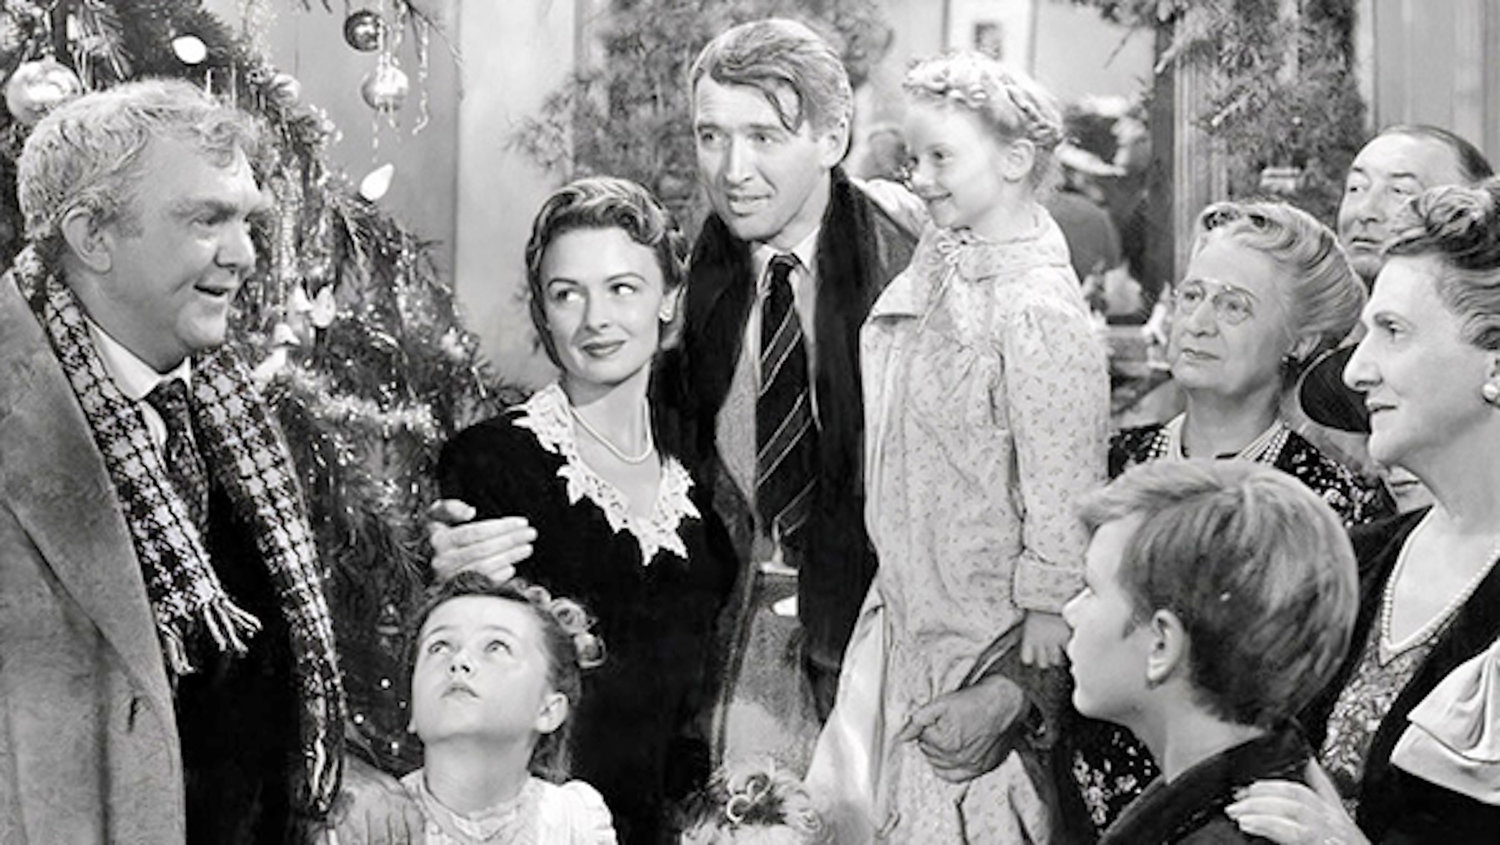 Rome’s Capitol Theatre, 220 W. Dominick St., will present screenings of the 1946 Frank Capra-directed movie, “It’s a Wonderful Life."